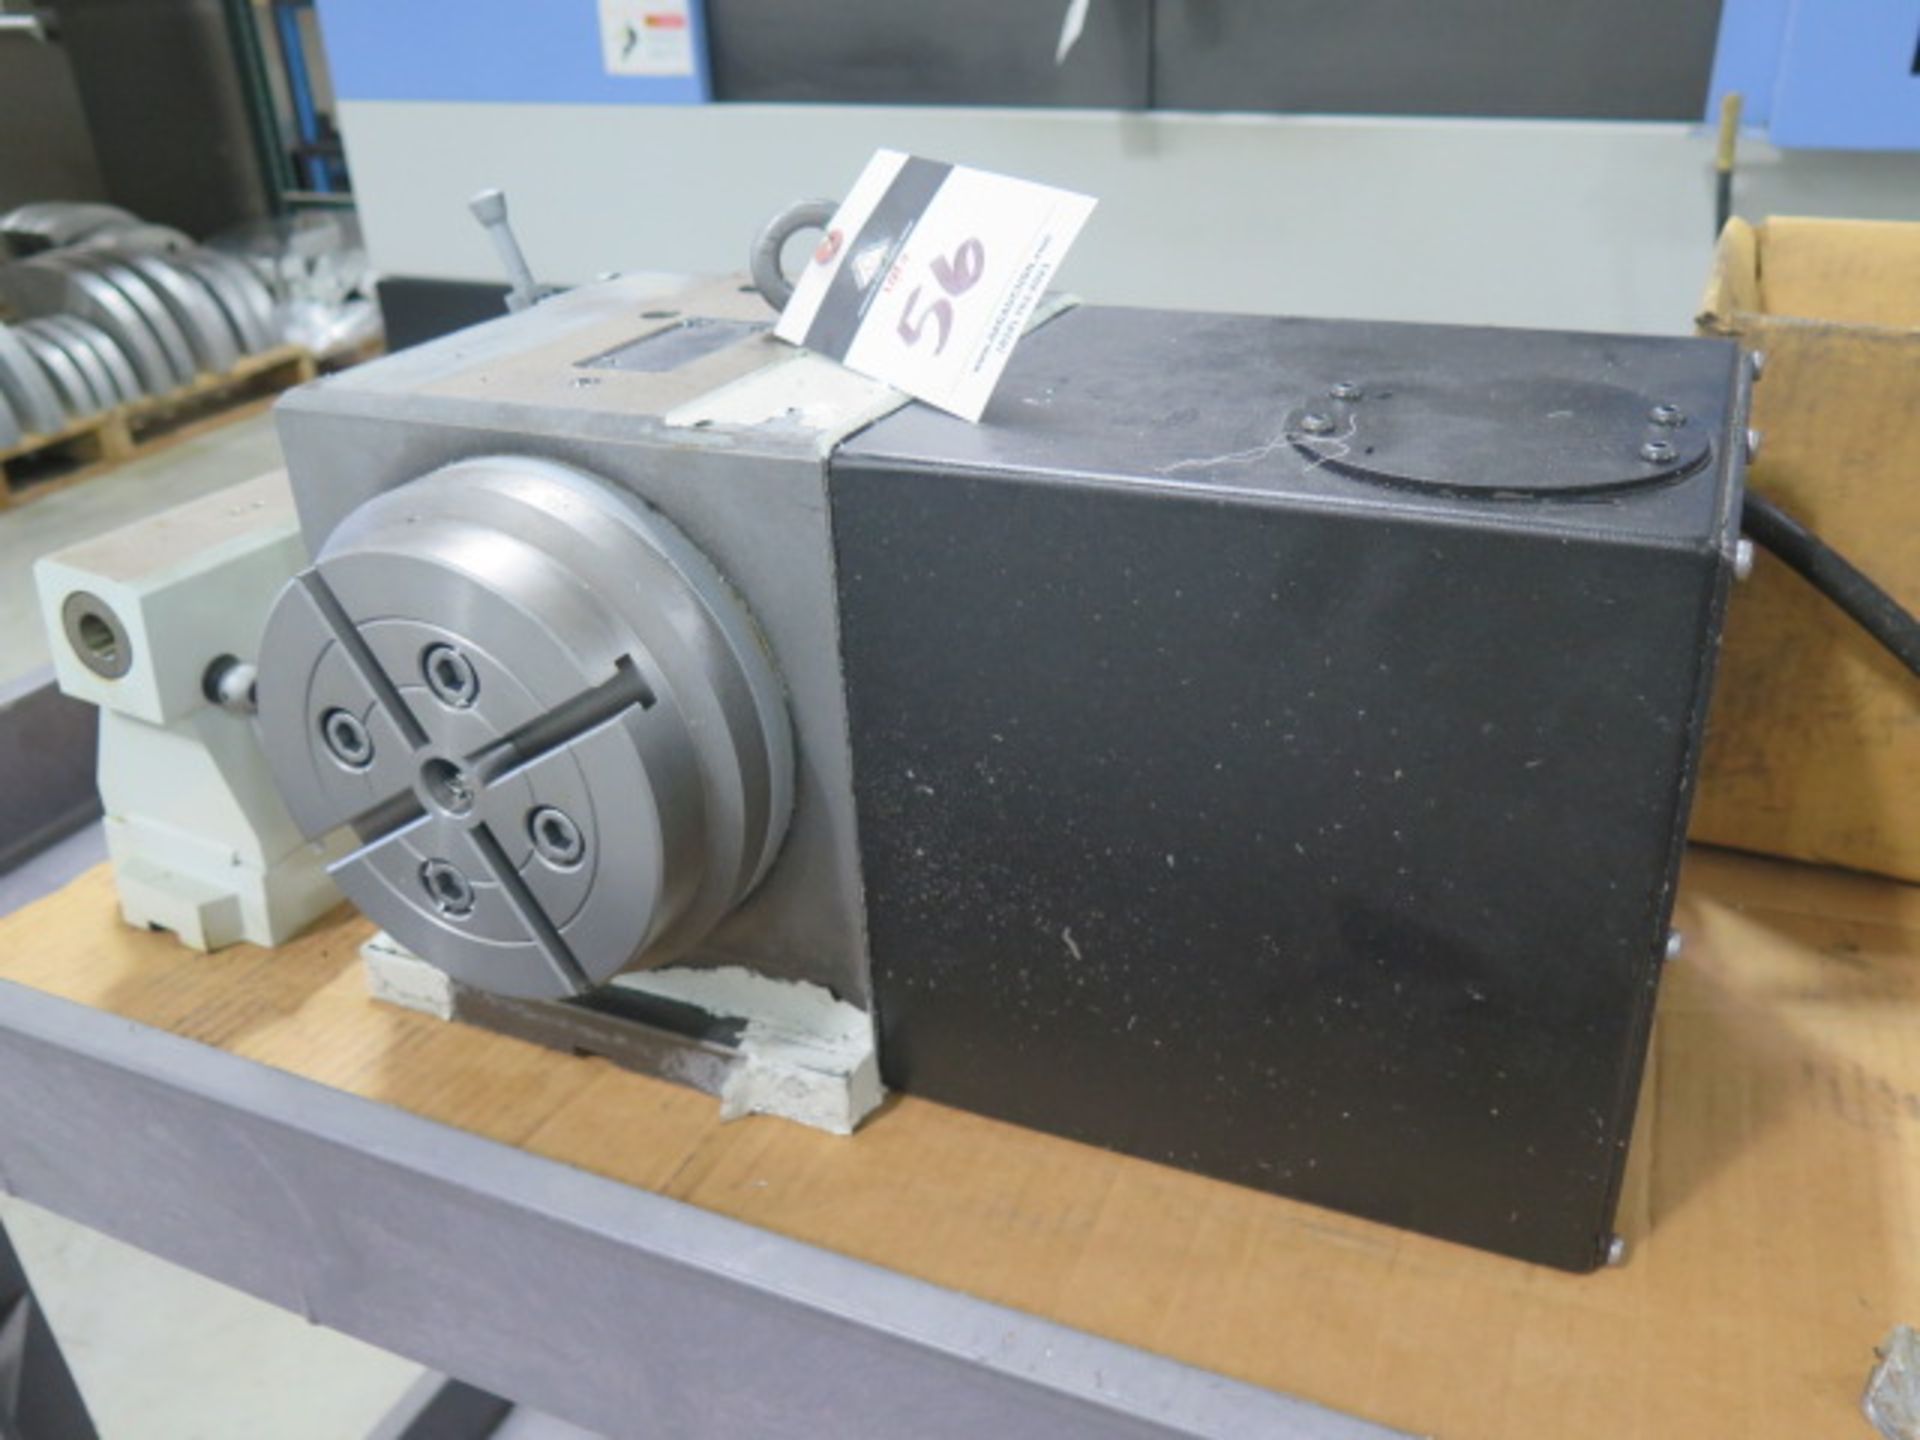 ATS mdl. RT160 4th Axis 6.3" Rotary Head (FITS DOOSAN DNM-500 MILL) - Image 3 of 6